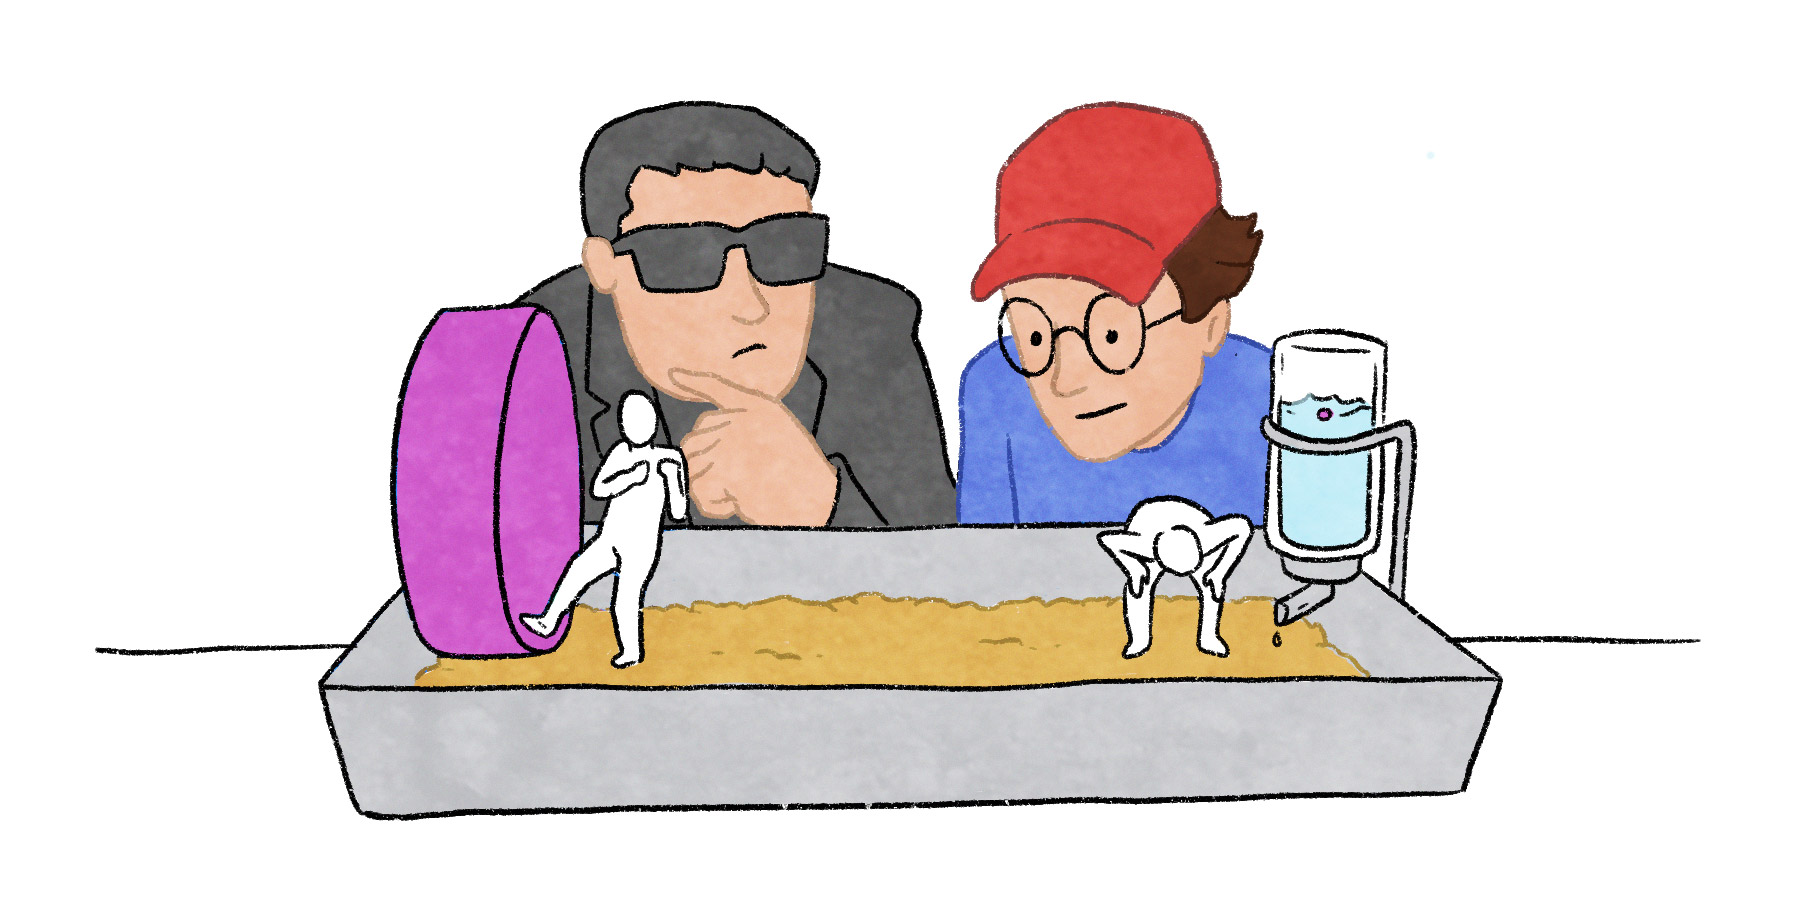 Man wearing sunglasses and man wearing red baseball cap looking quizzically at tiny people inside a hamster enclosure with an exercise wheel and animal water bottle.